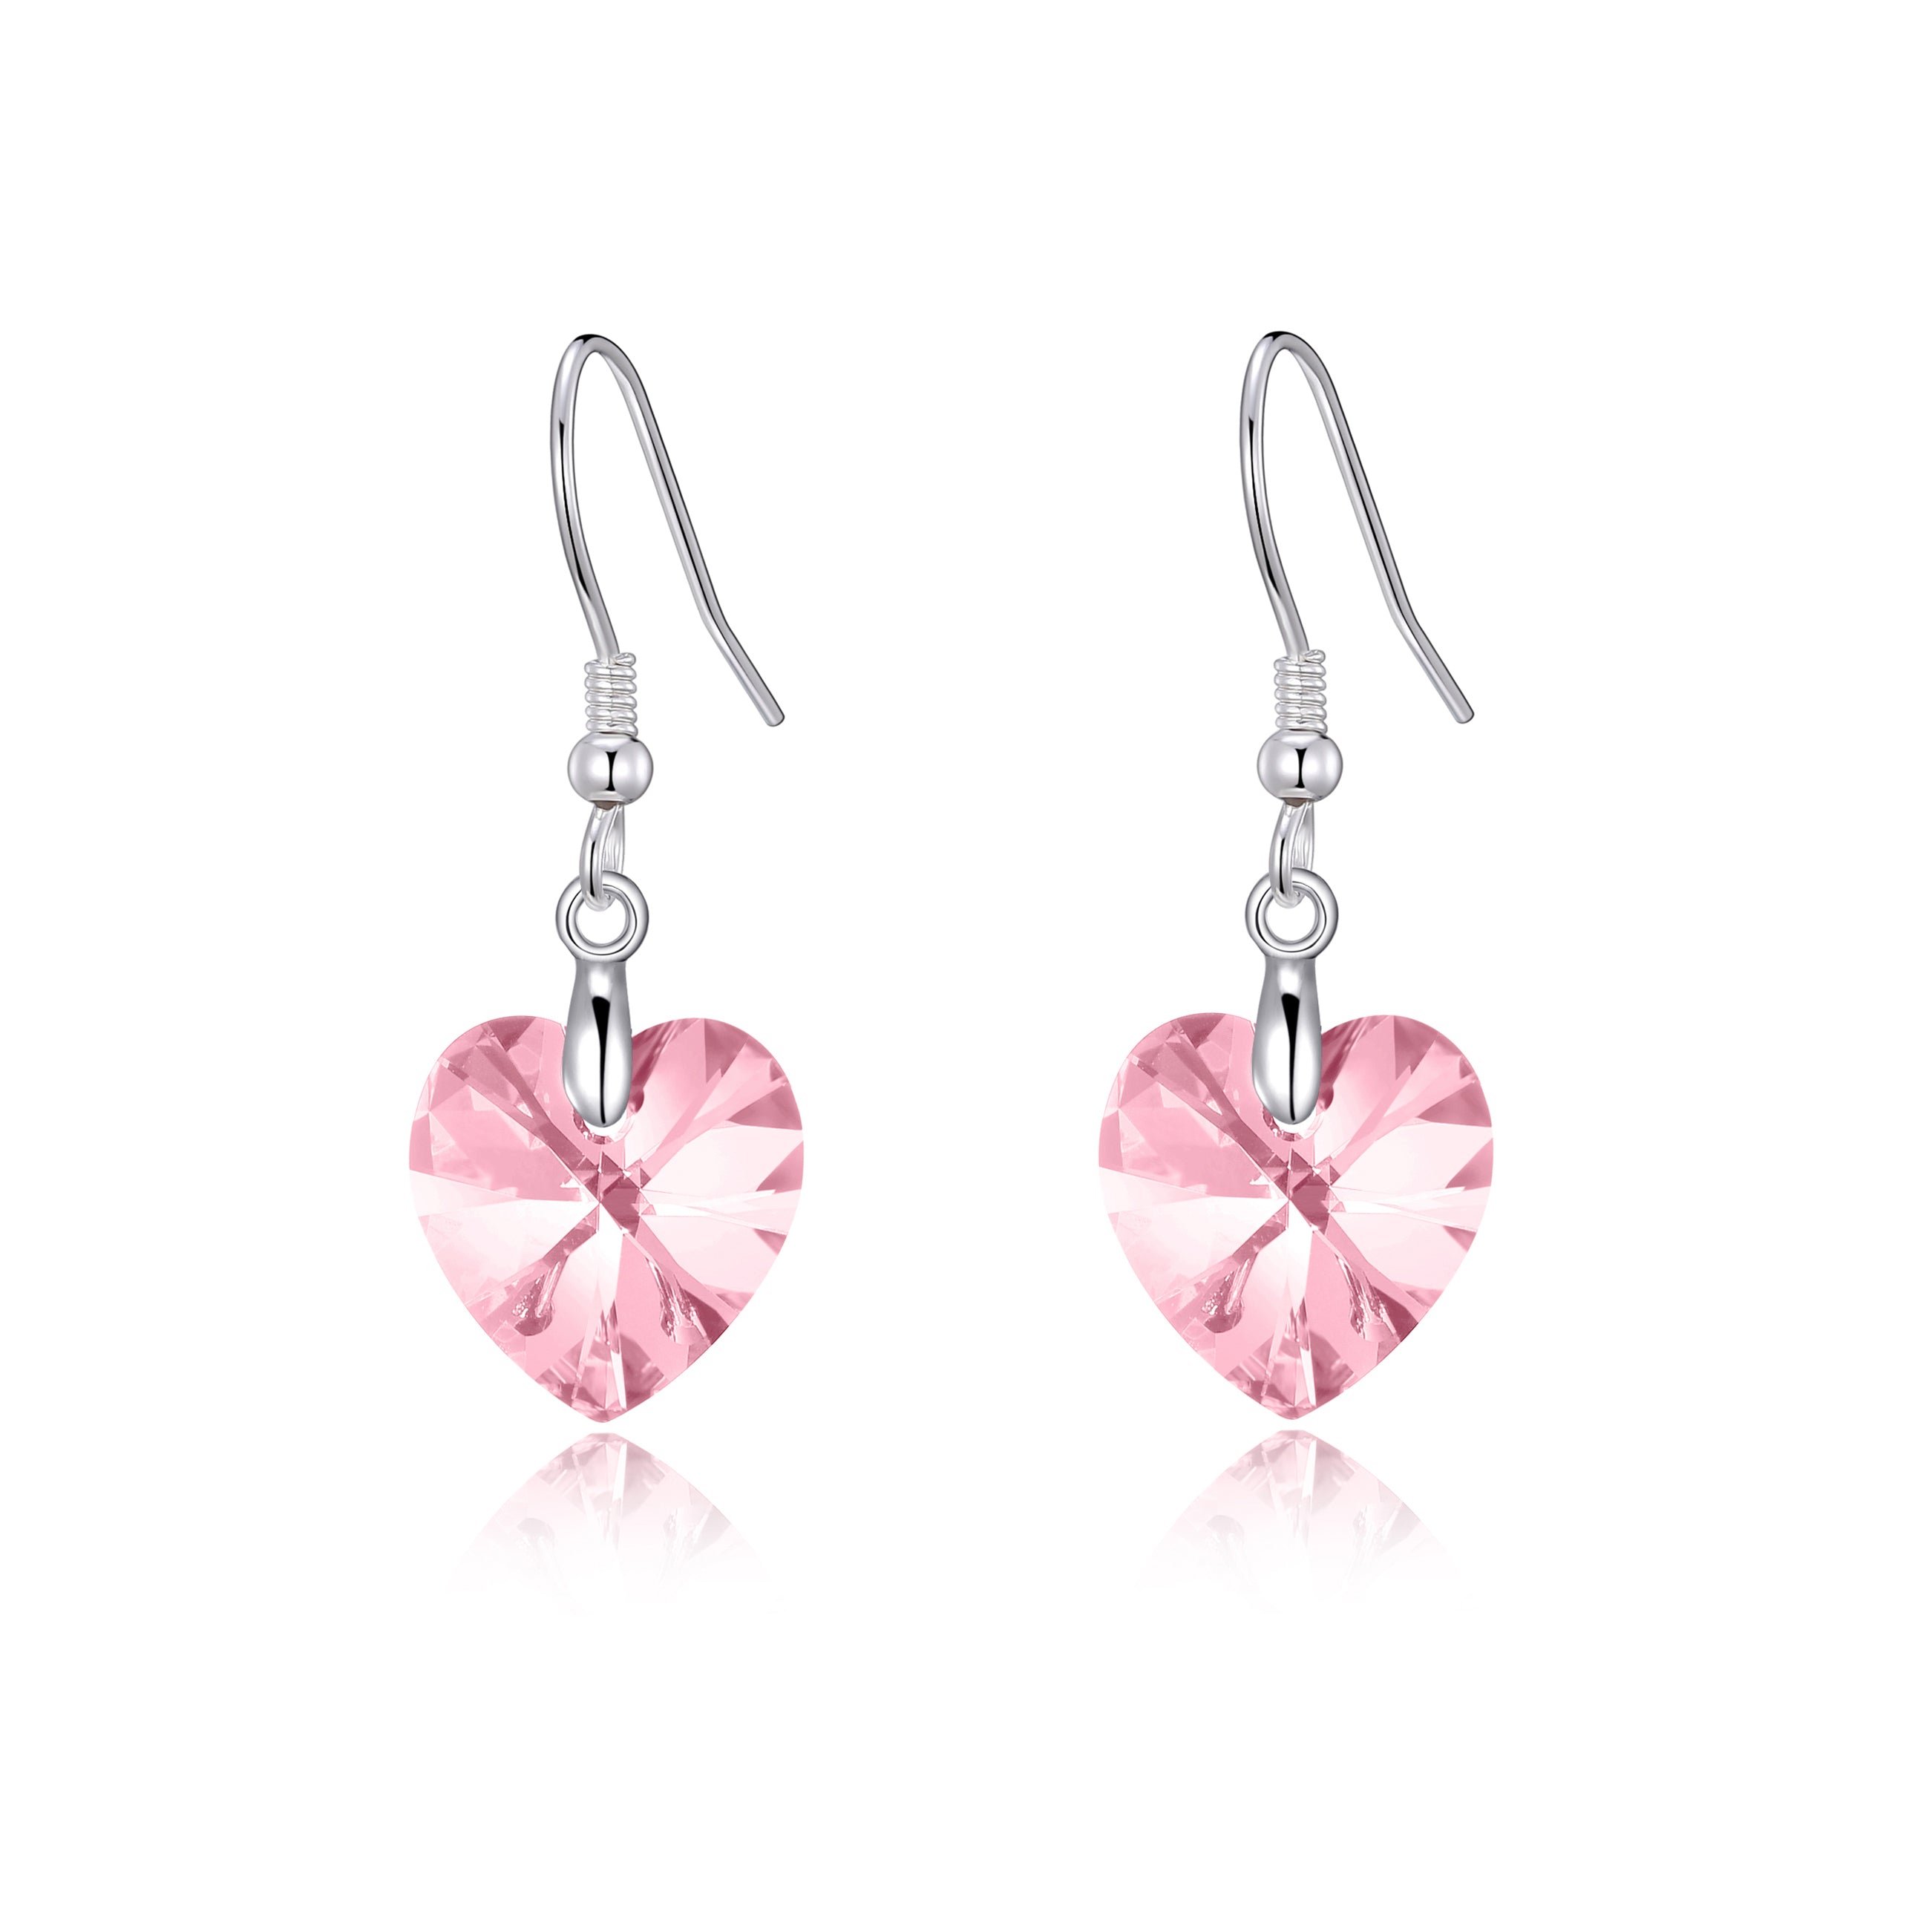 Sterling Silver Light Rose Heart Earrings Created with Zircondia® Crystals by Philip Jones Jewellery